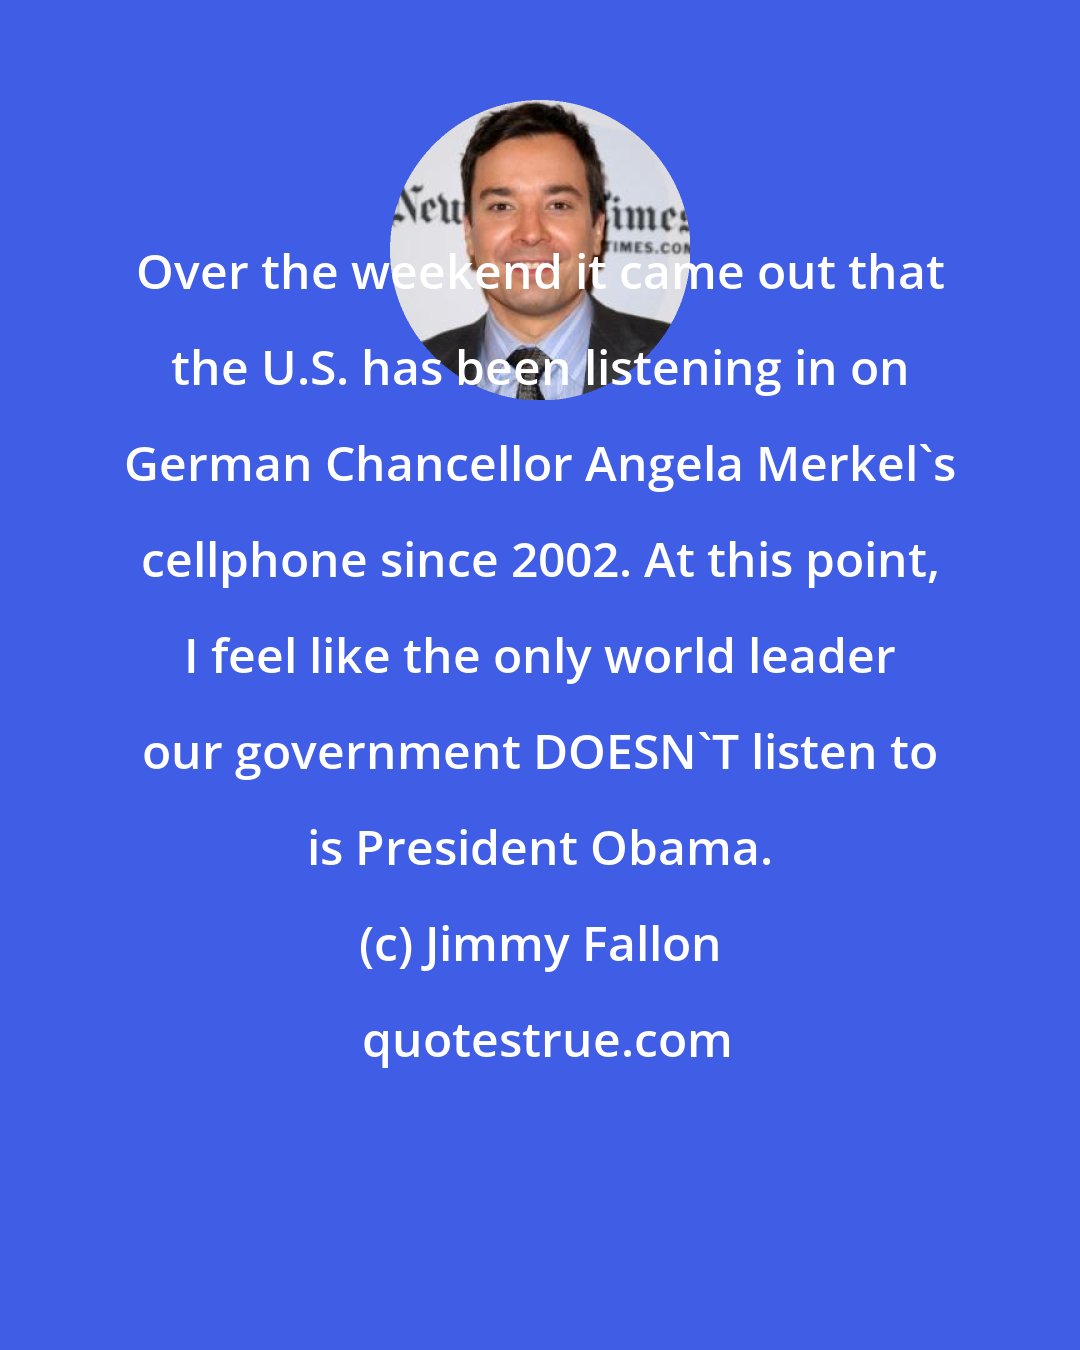 Jimmy Fallon: Over the weekend it came out that the U.S. has been listening in on German Chancellor Angela Merkel's cellphone since 2002. At this point, I feel like the only world leader our government DOESN'T listen to is President Obama.